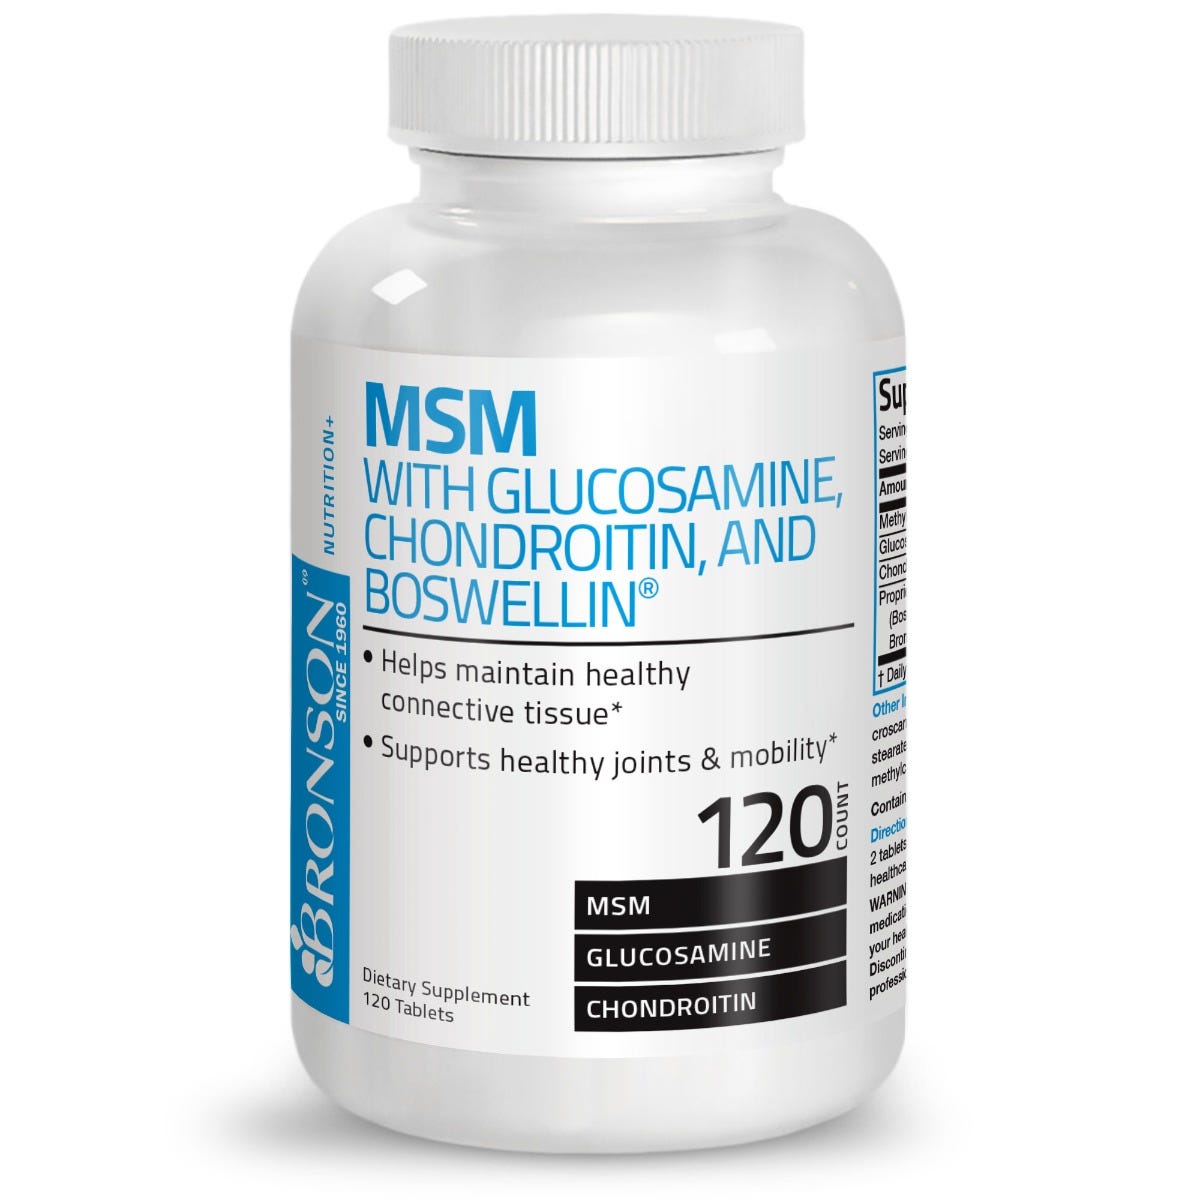 MSM with Glucosamine, Chondroitin, Boswellin®